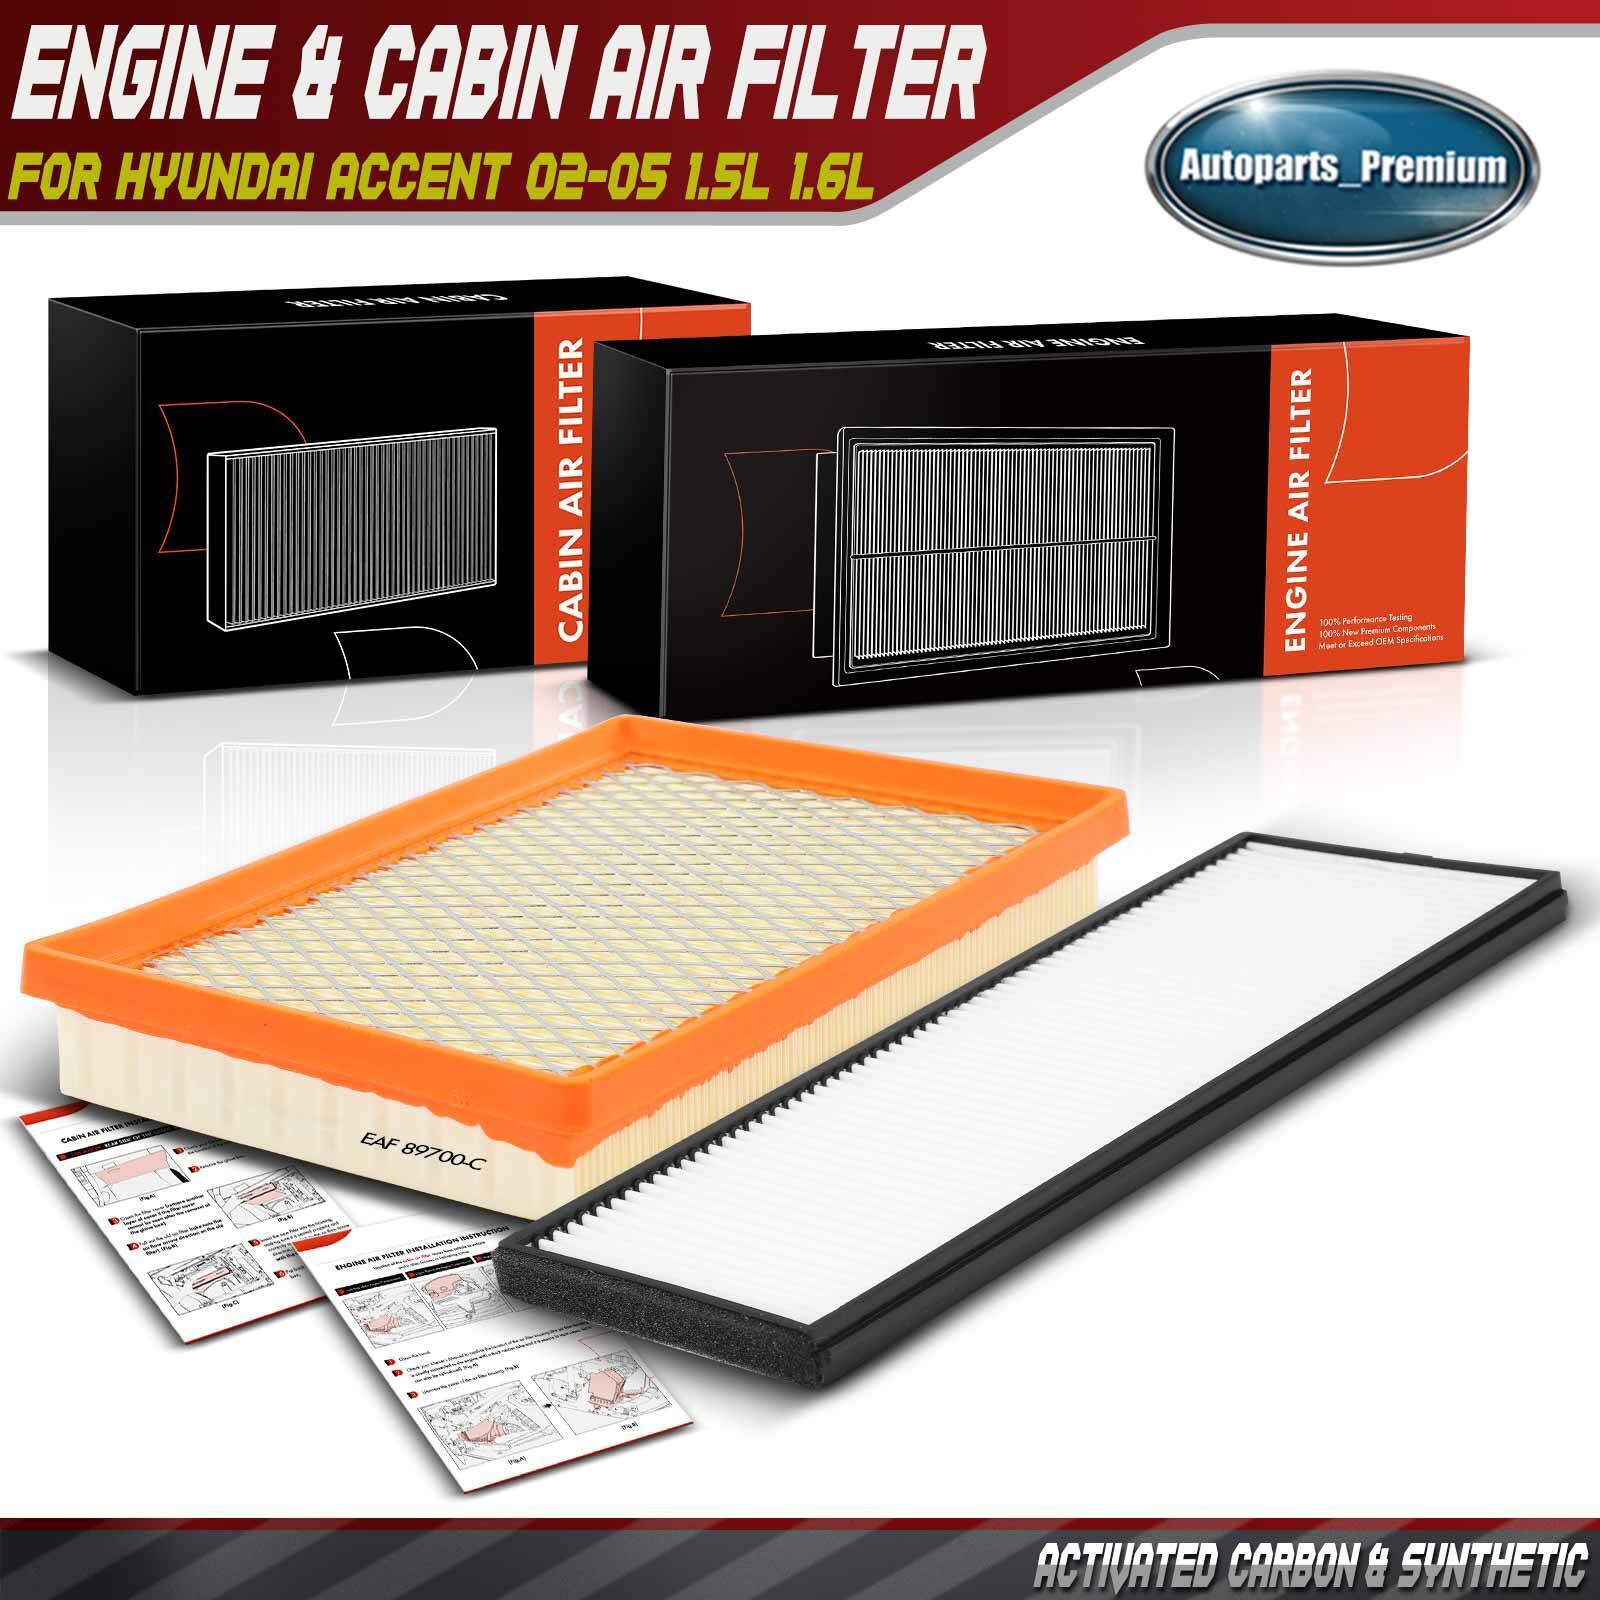 Engine & Activated Carbon Cabin Air Filter for Hyundai Accent 02-05 1.5L 1.6L